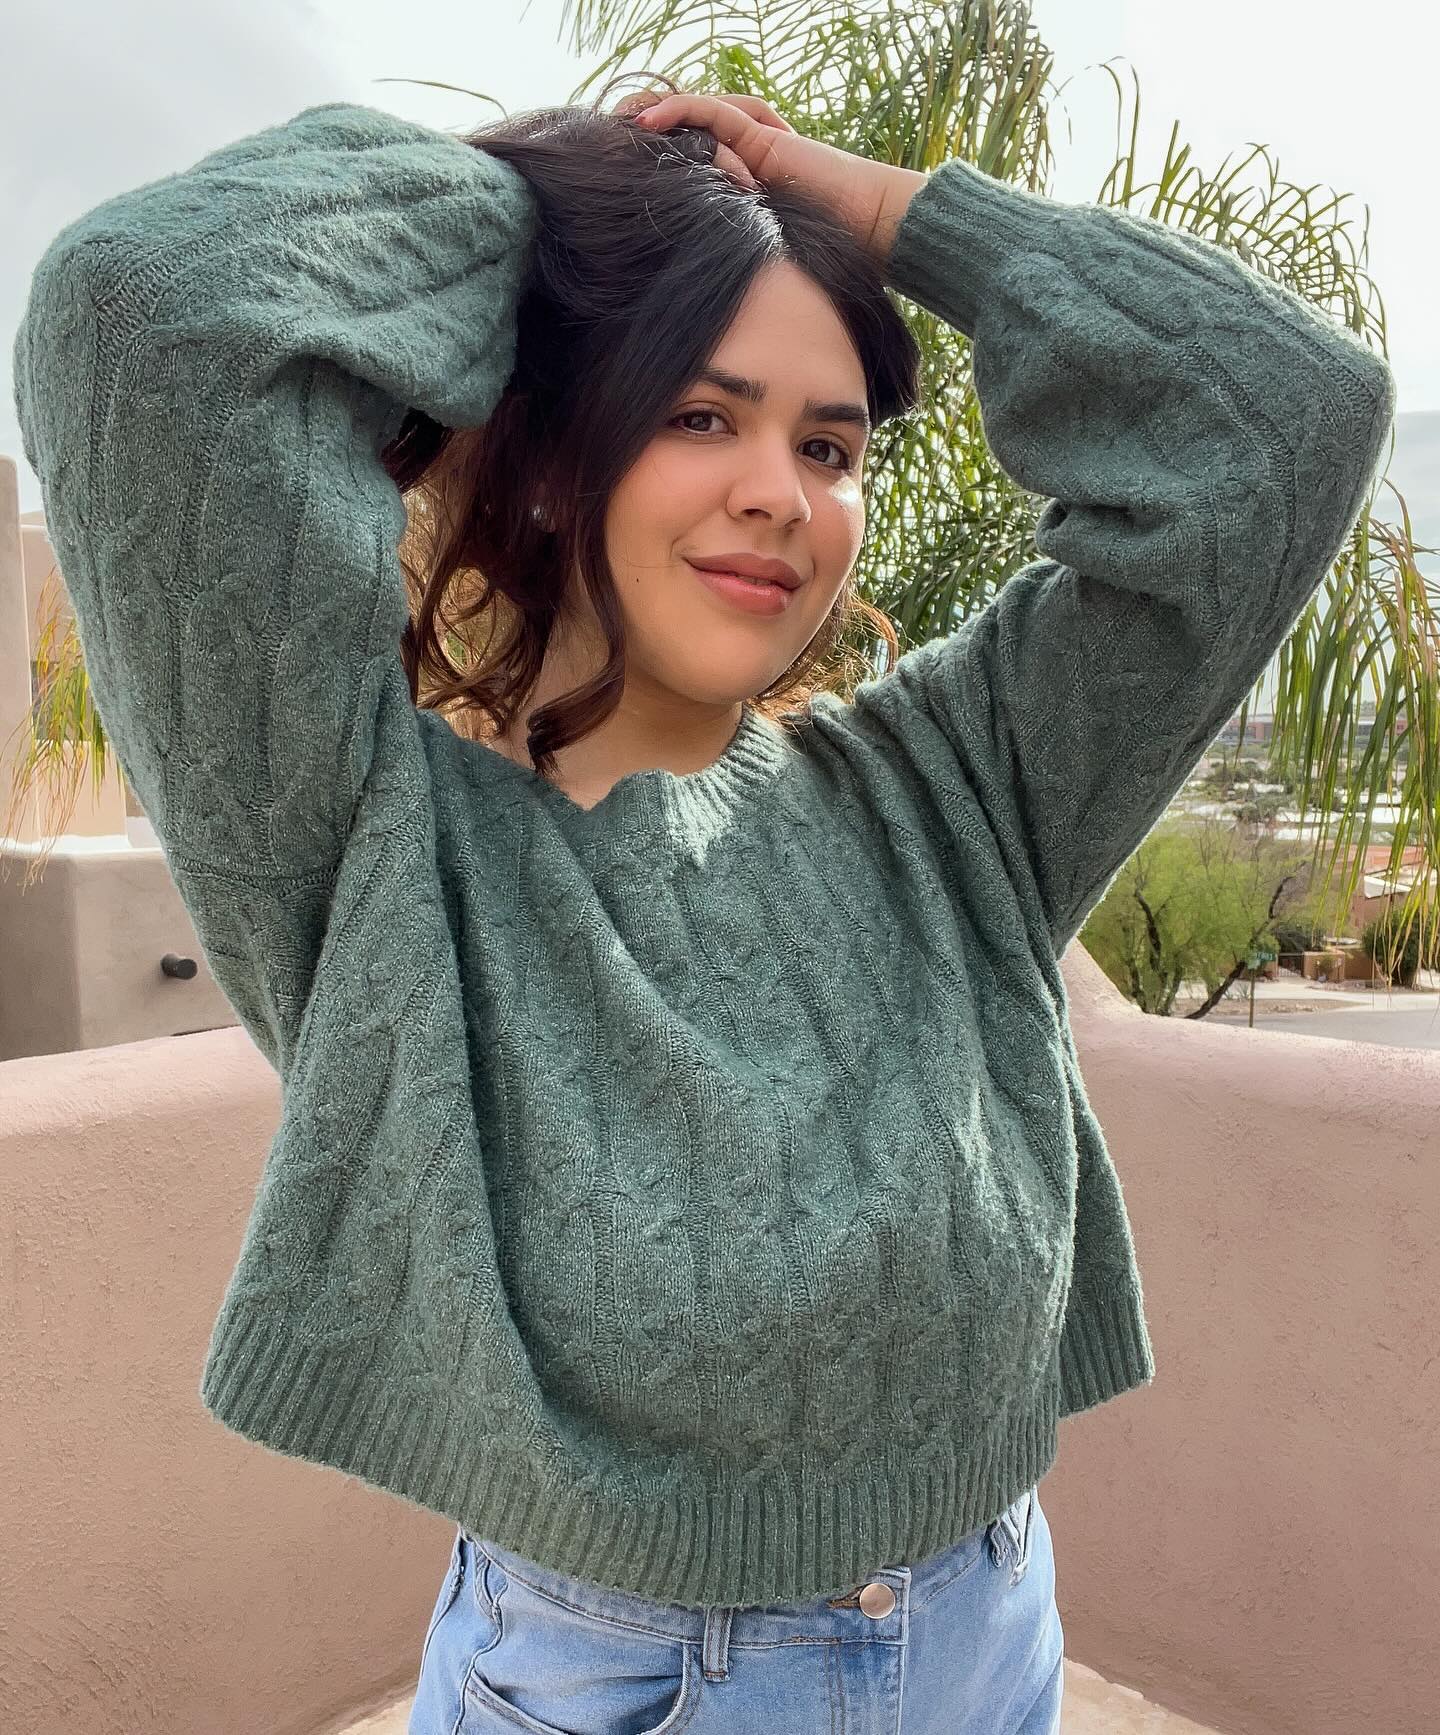 The Winter Cable Knit Sweater - Green - Magnolia Boutique